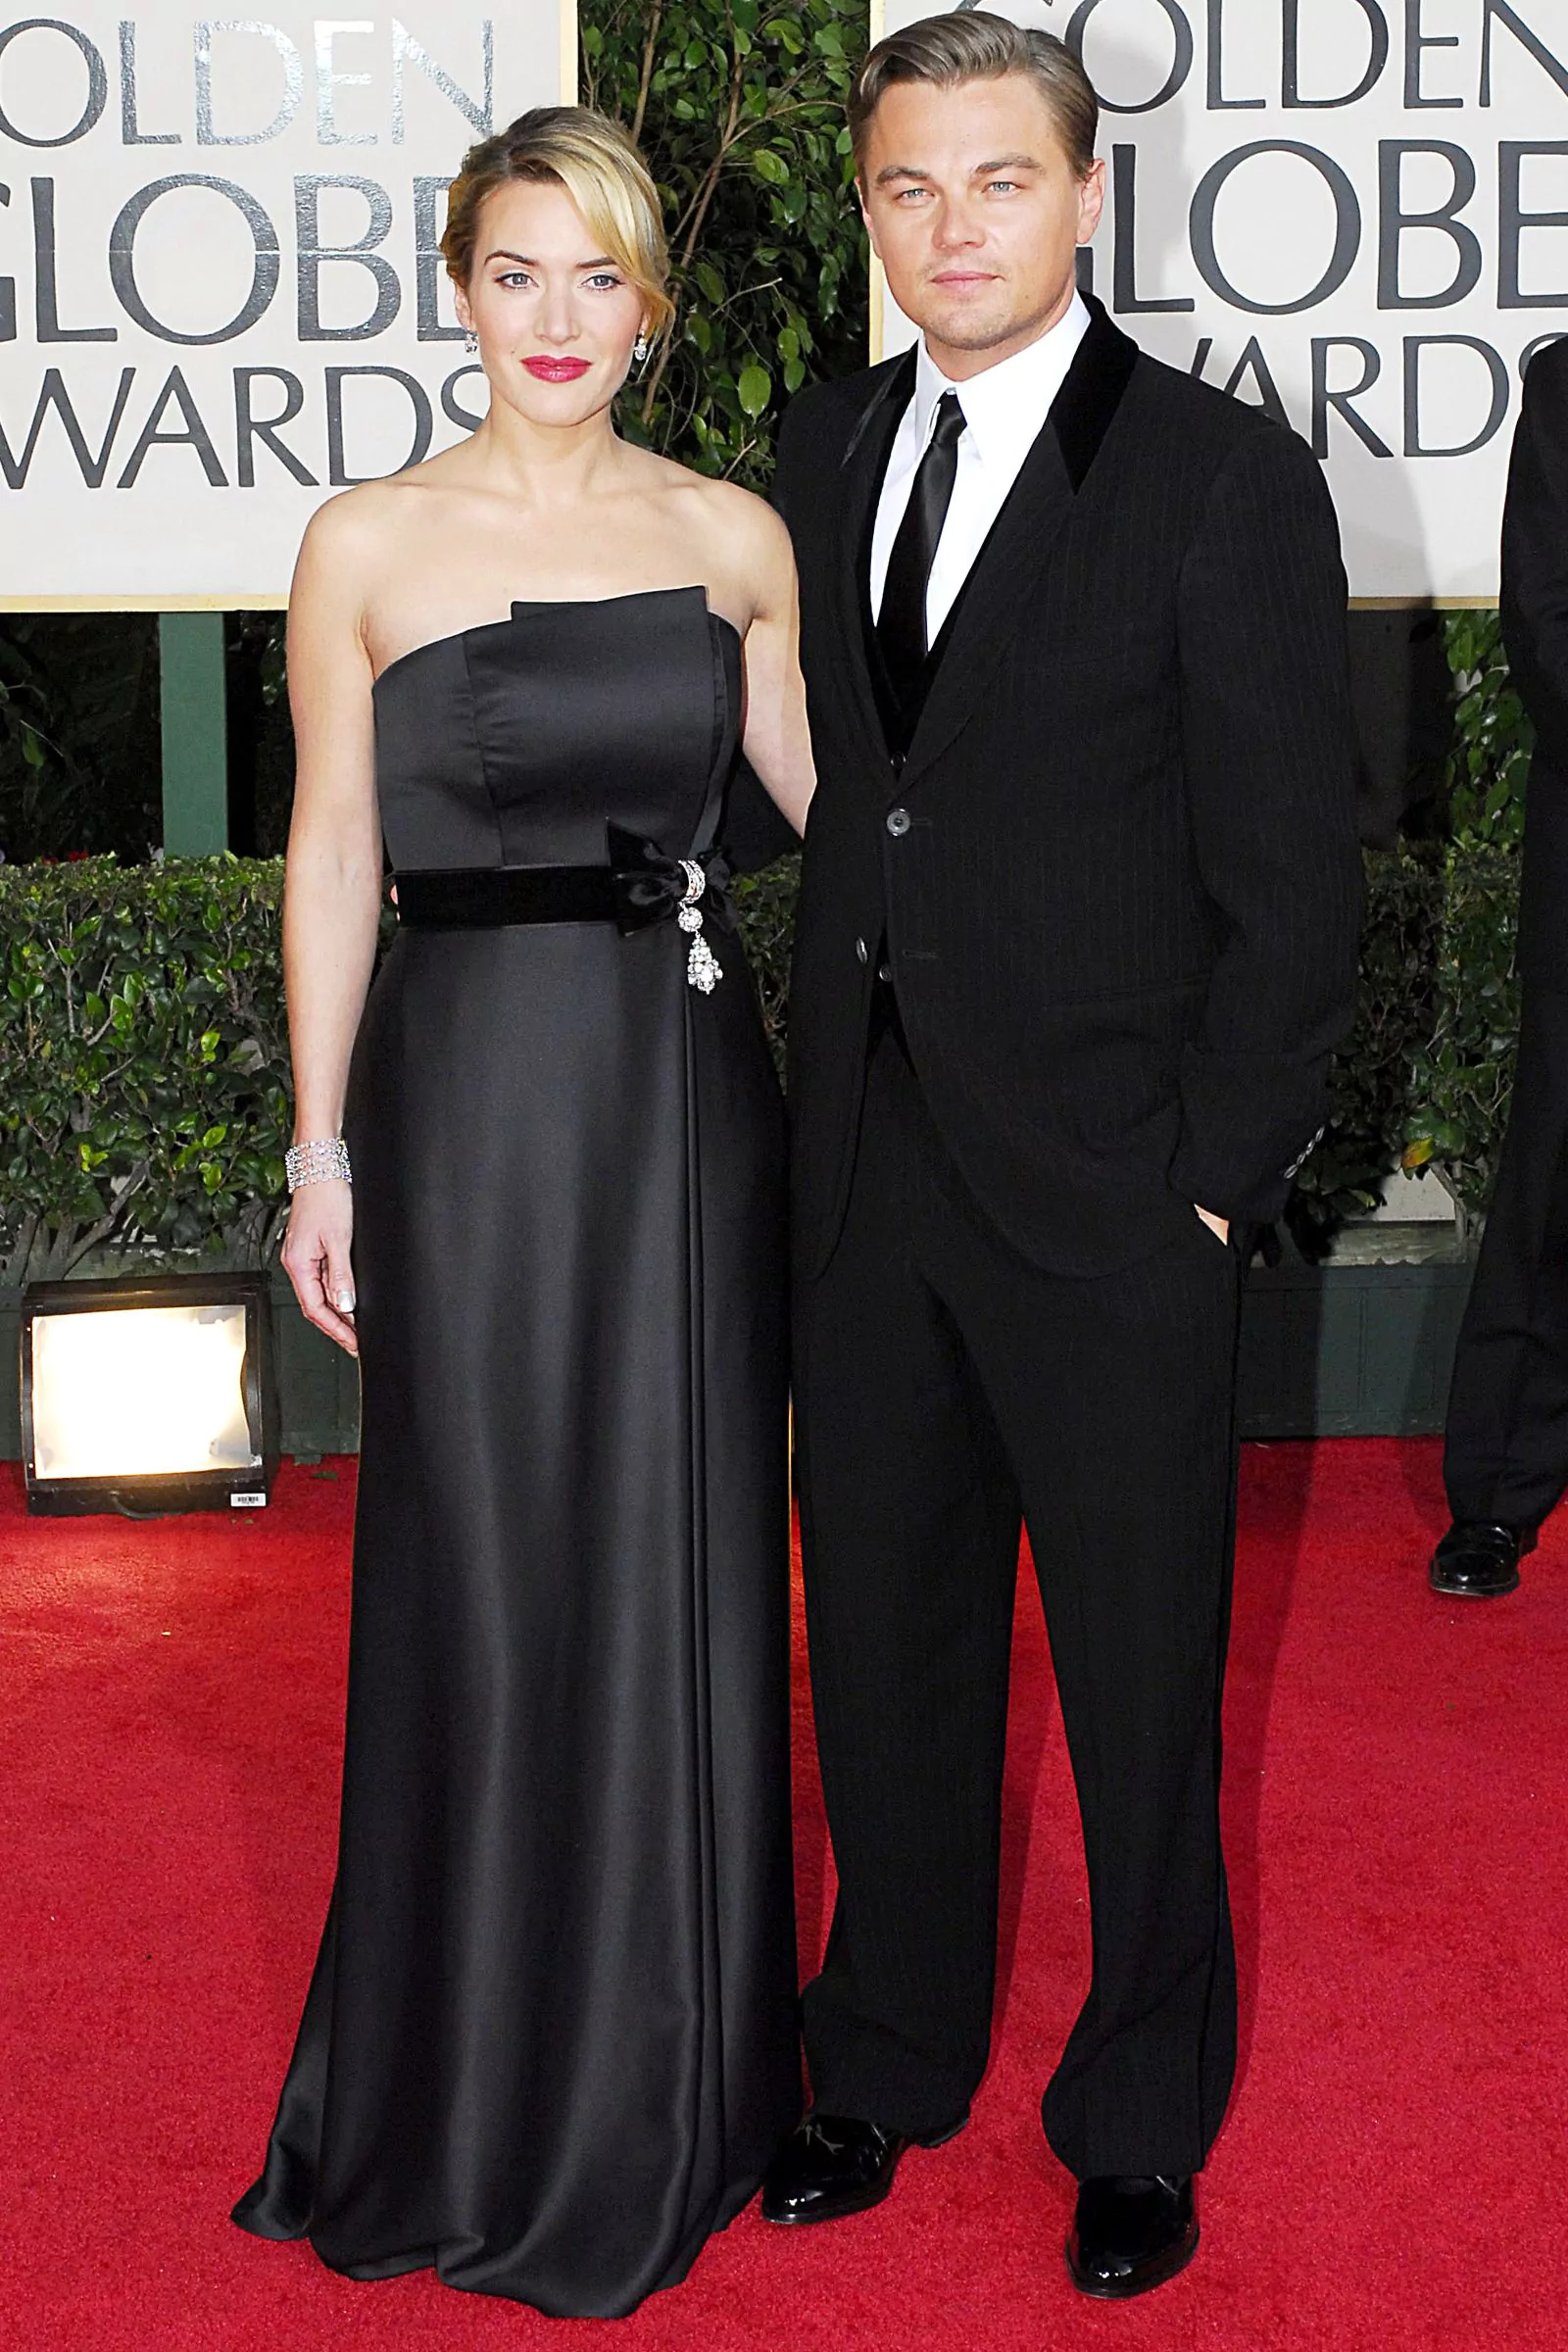 Kate Winslet and Leonardo DiCaprio at the 66th Annual Golden Globe Awards, January 11, 2009